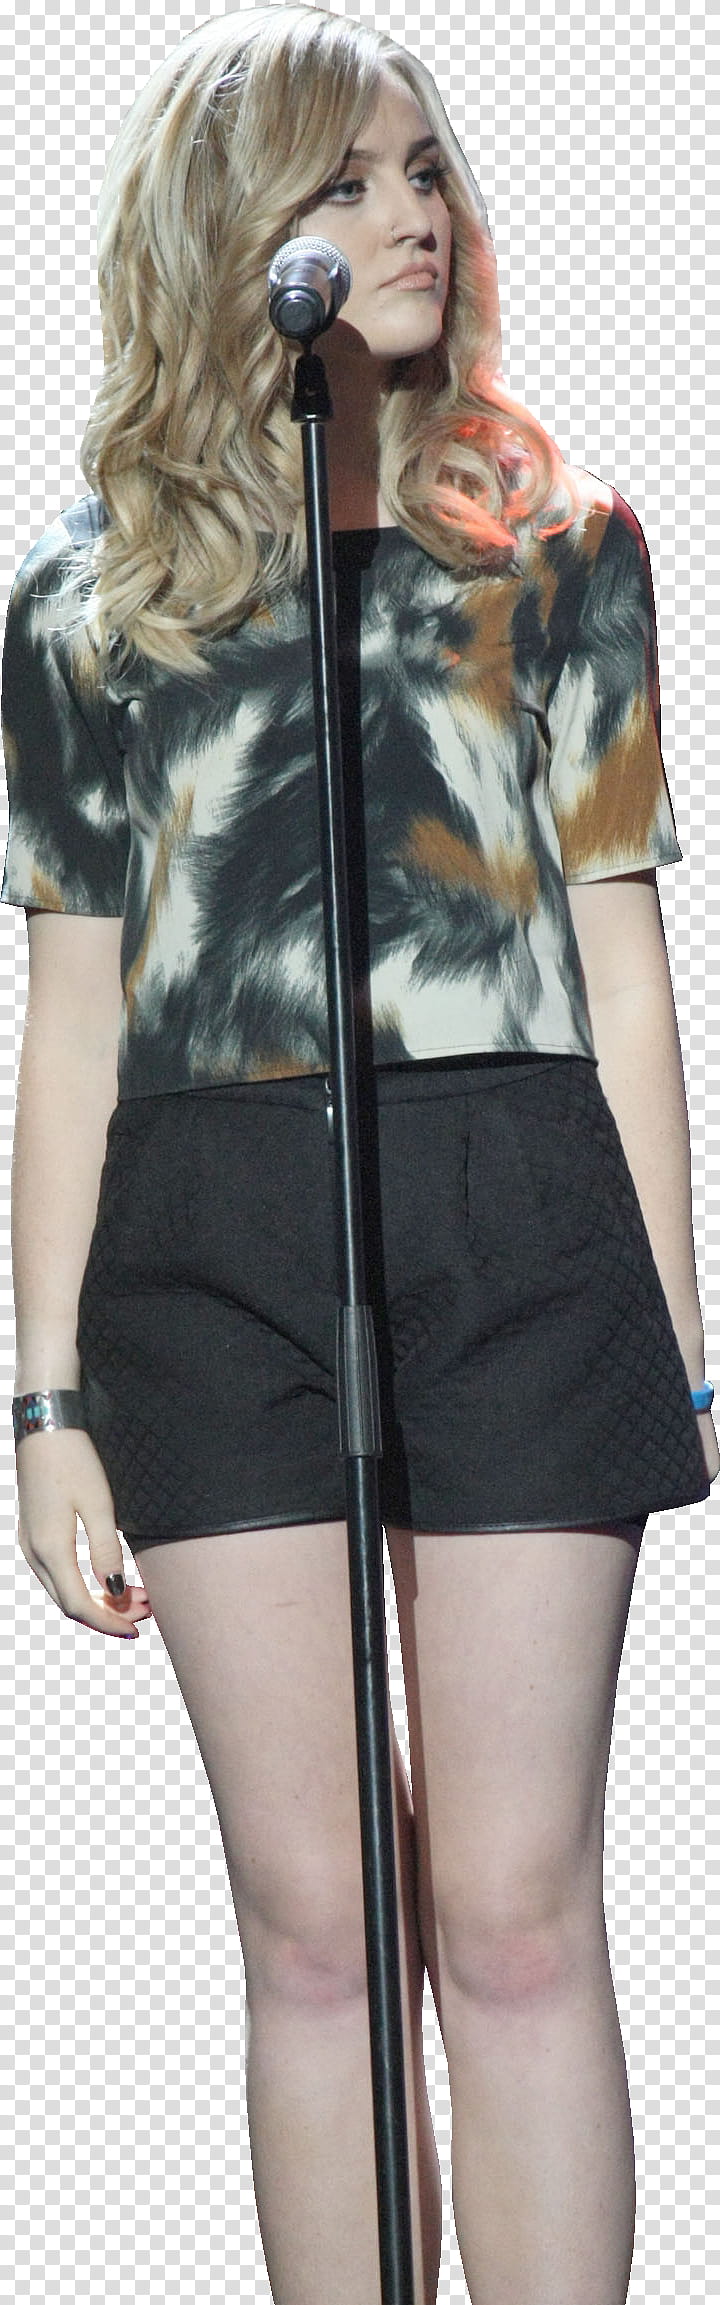 Perrie Edwards HQ, Chloe Grace Moretz standing in front of microphone with stand transparent background PNG clipart